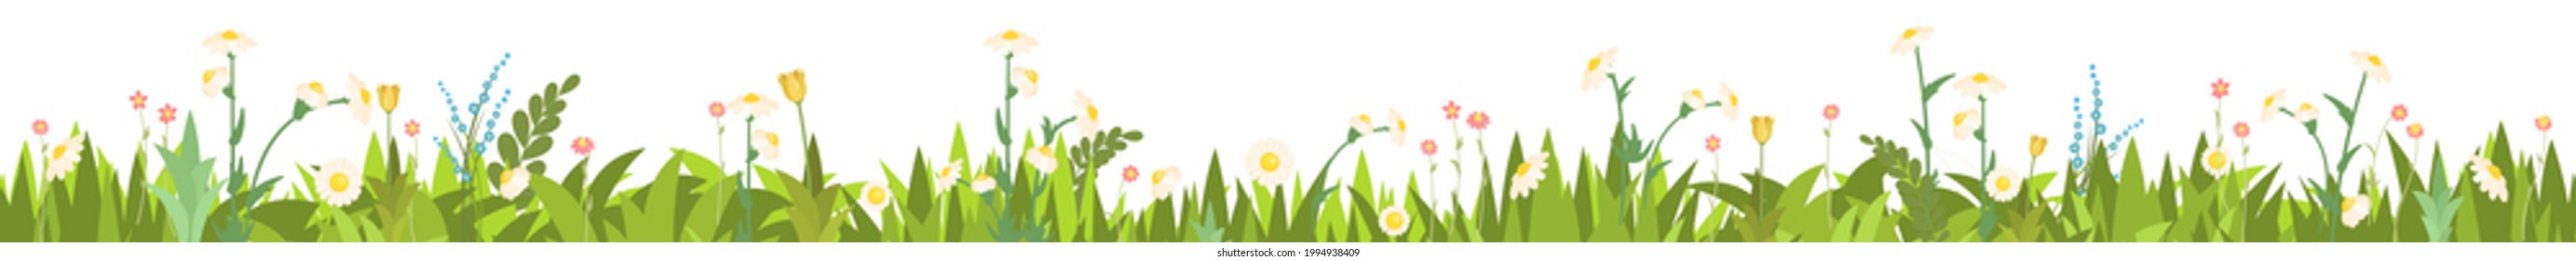 Meadow with wildflowers. Seamless illustration. Grass close-up. Green summer landscape. Rural pasture. Cartoon style. Flat design. Flowers. Isolated on white background. Vector art